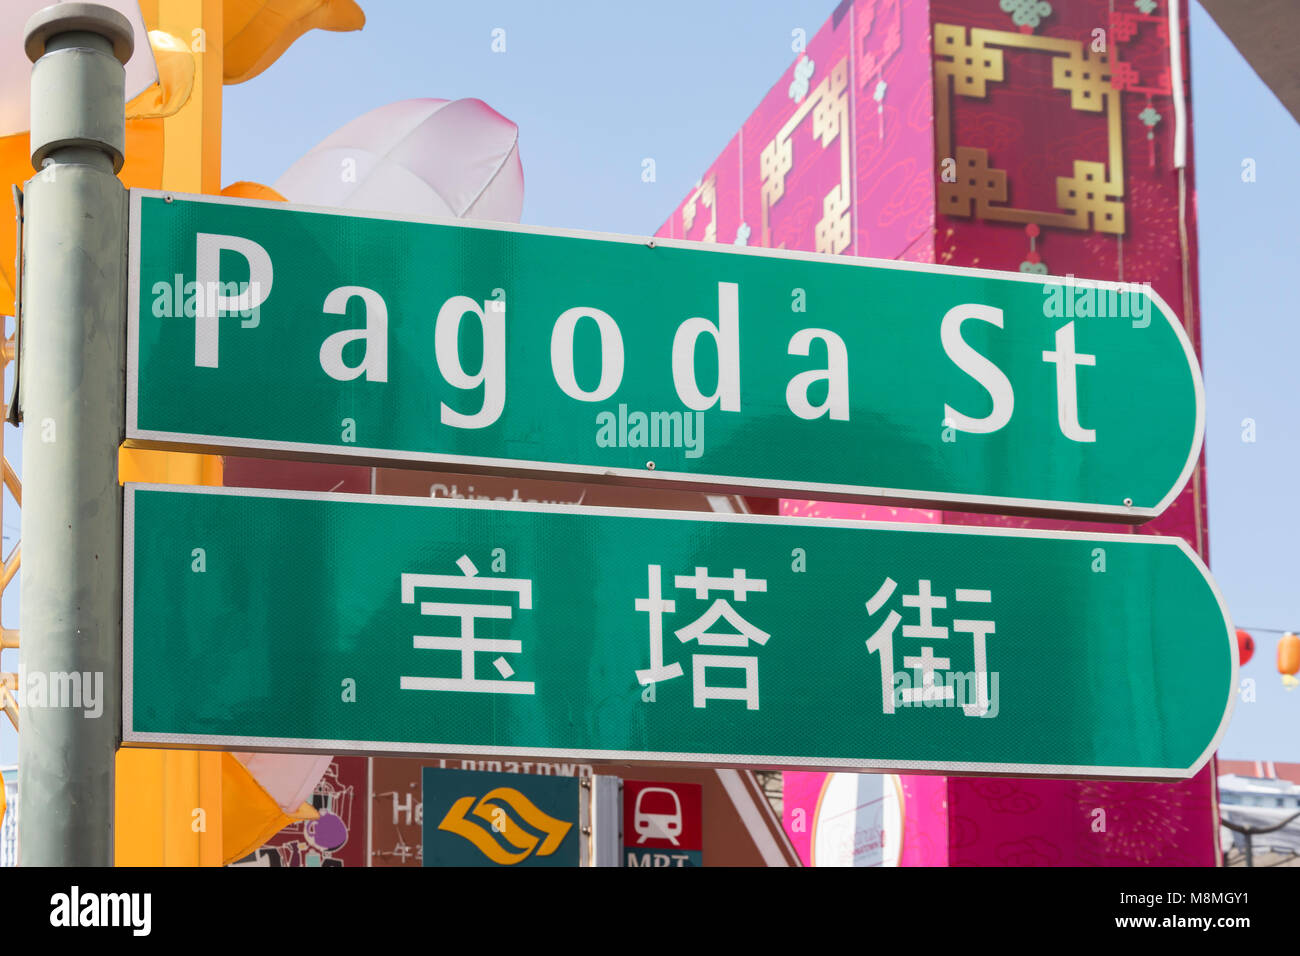 Pagoda Street sign, Chinatown, Outram District, Central Area, Singapore Island (Pulau Ujong), Singapore Stock Photo